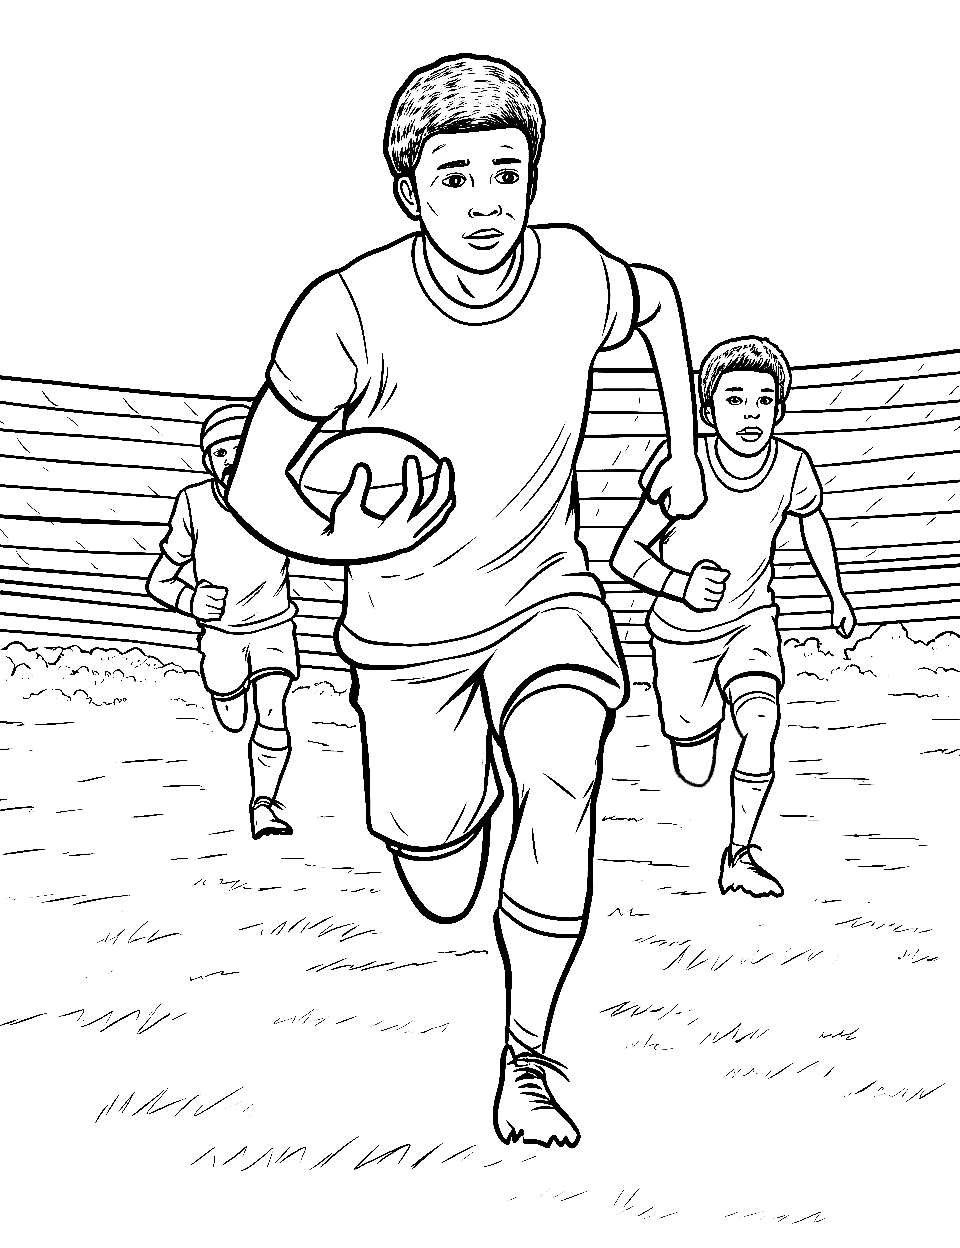 Players Training Coloring Page - Players training for the upcoming match on the football field.